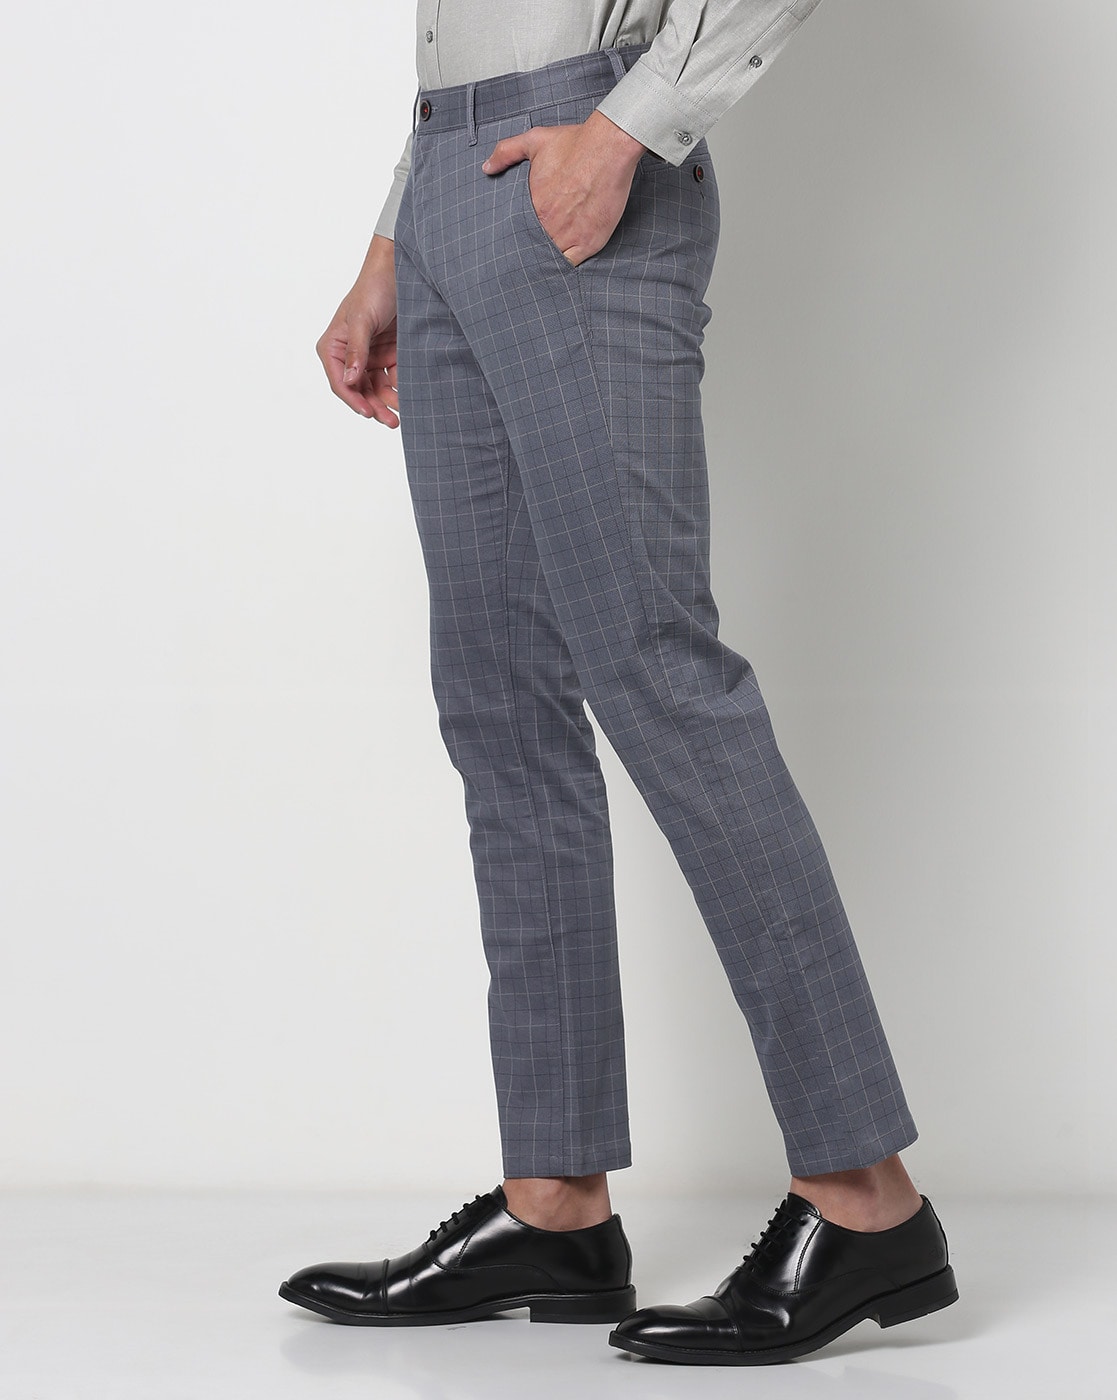 5 Looks with a pair of tartan trousers  Sartoria Lab